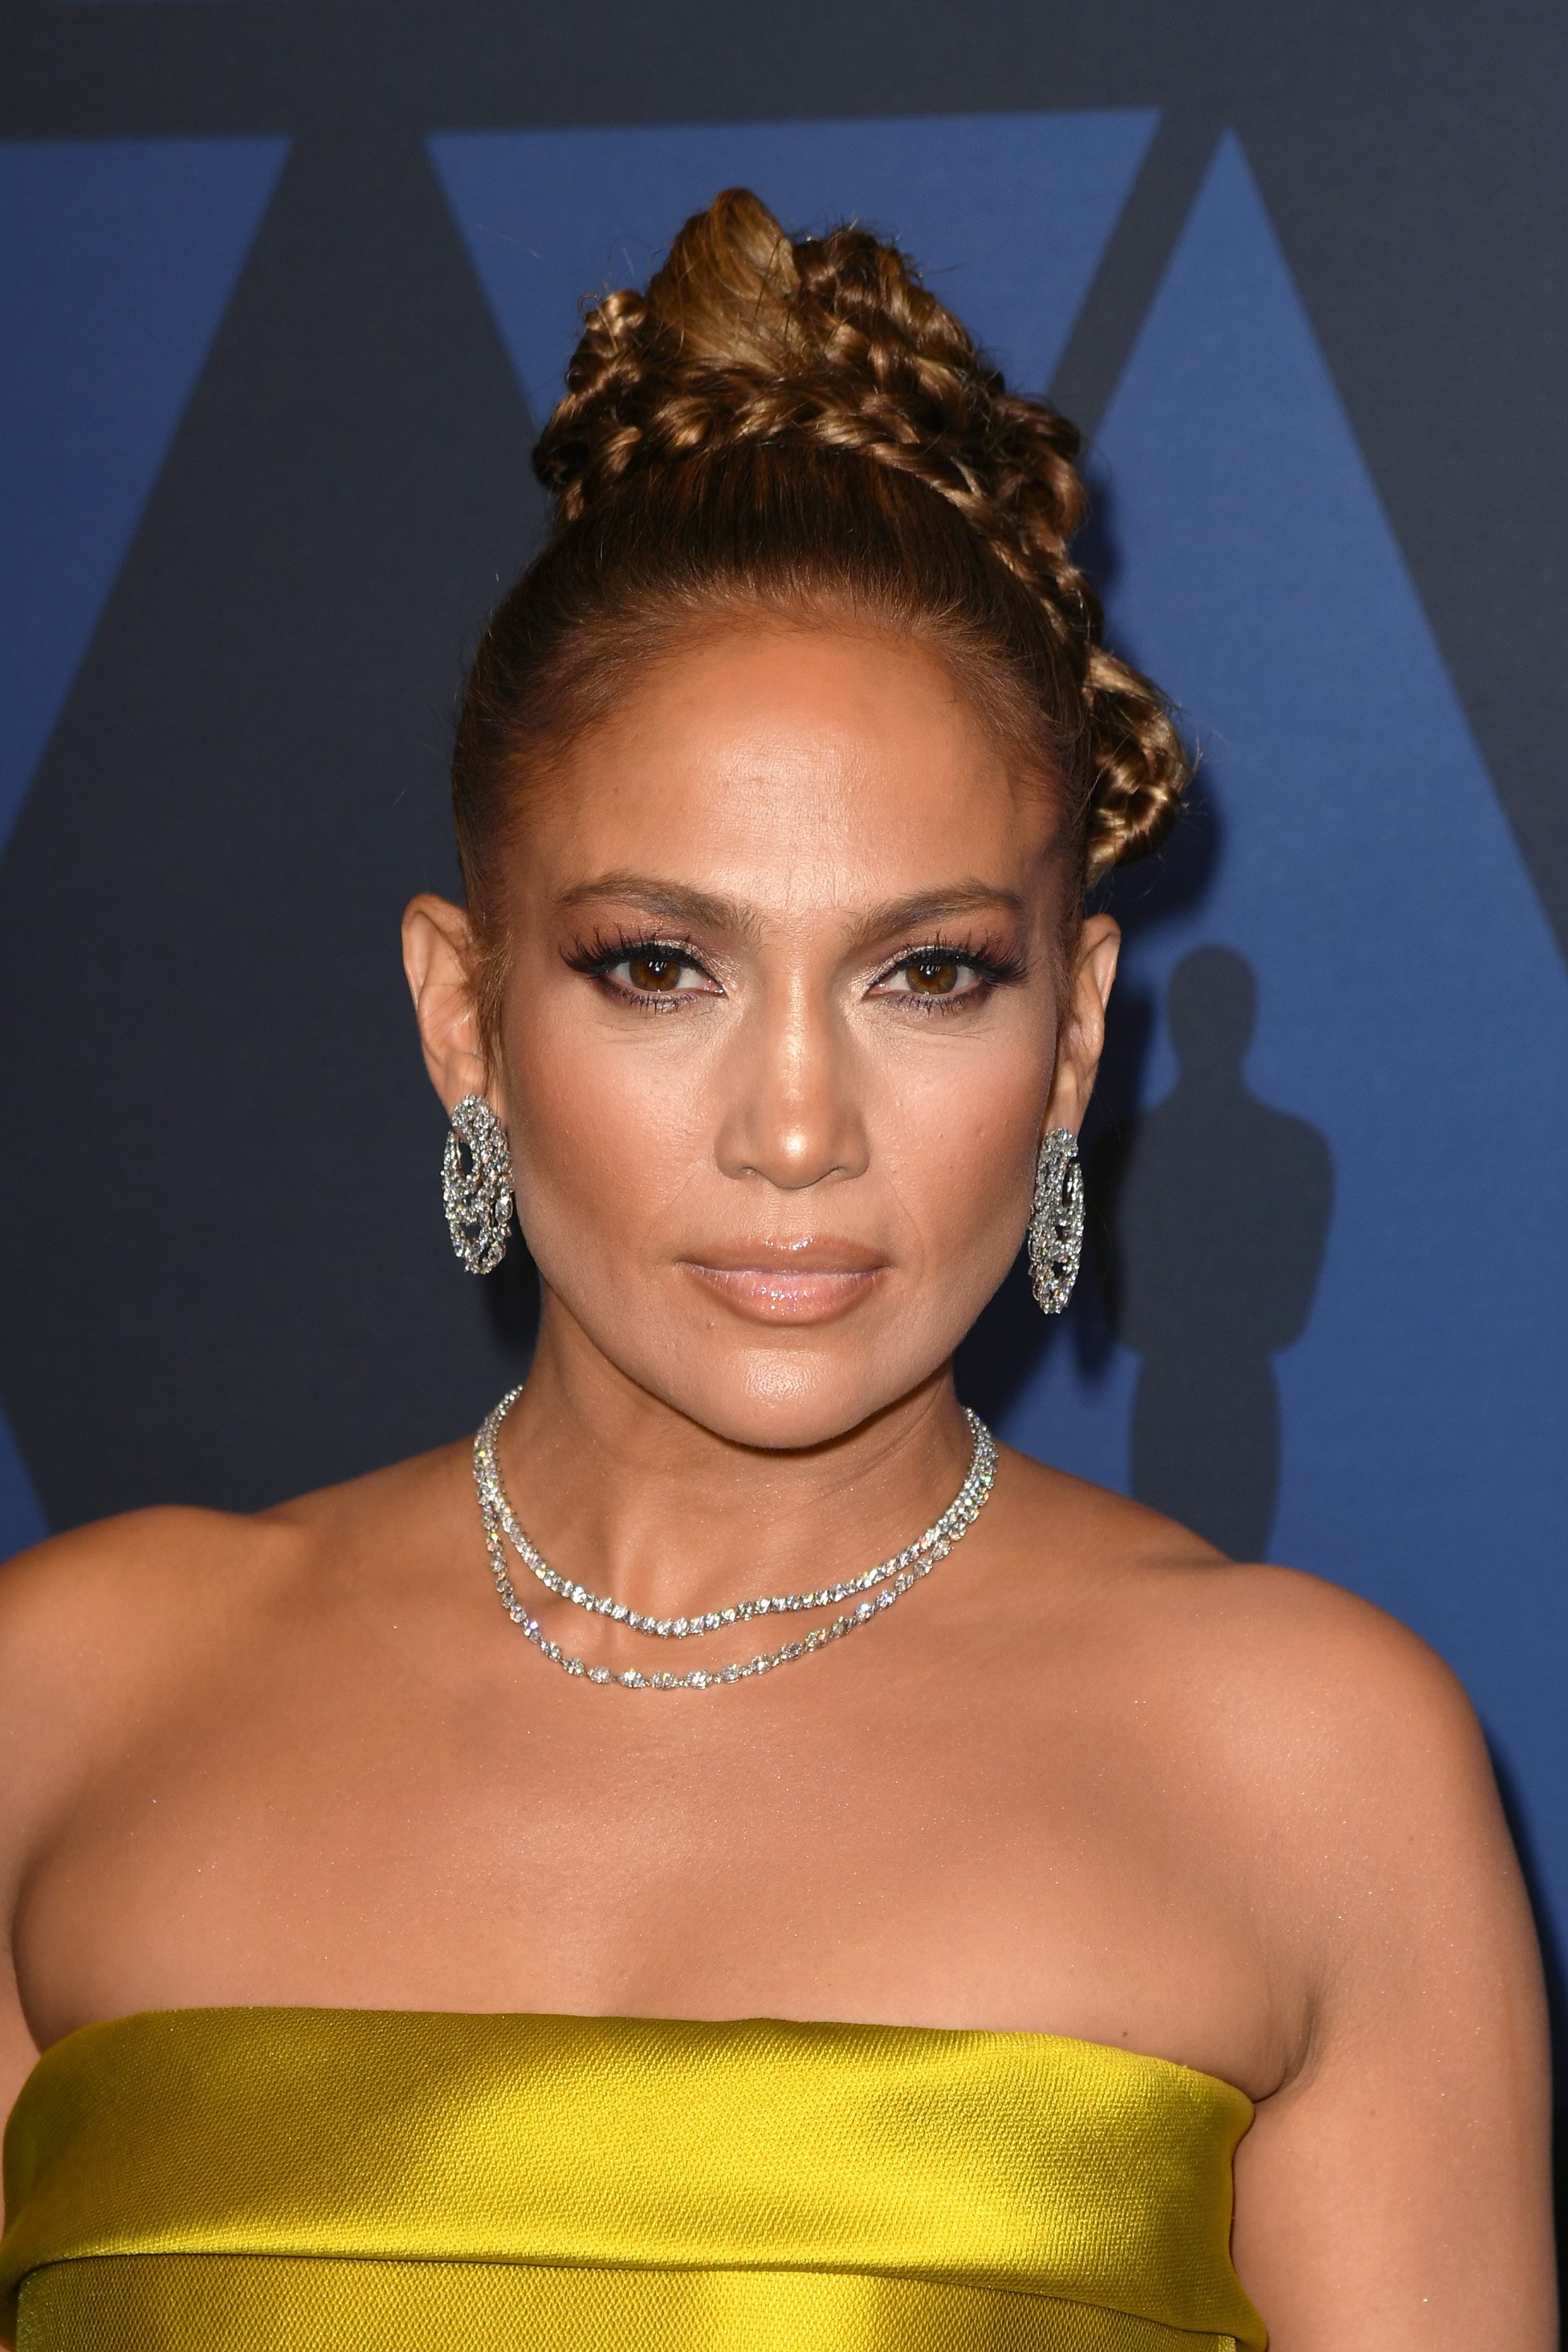 Jennifer Lopez attends the Academy Of Motion Picture Arts And Sciences' 11th Annual Governors Awards on October 27, 2019, in Hollywood, California. | Source: Getty Images.